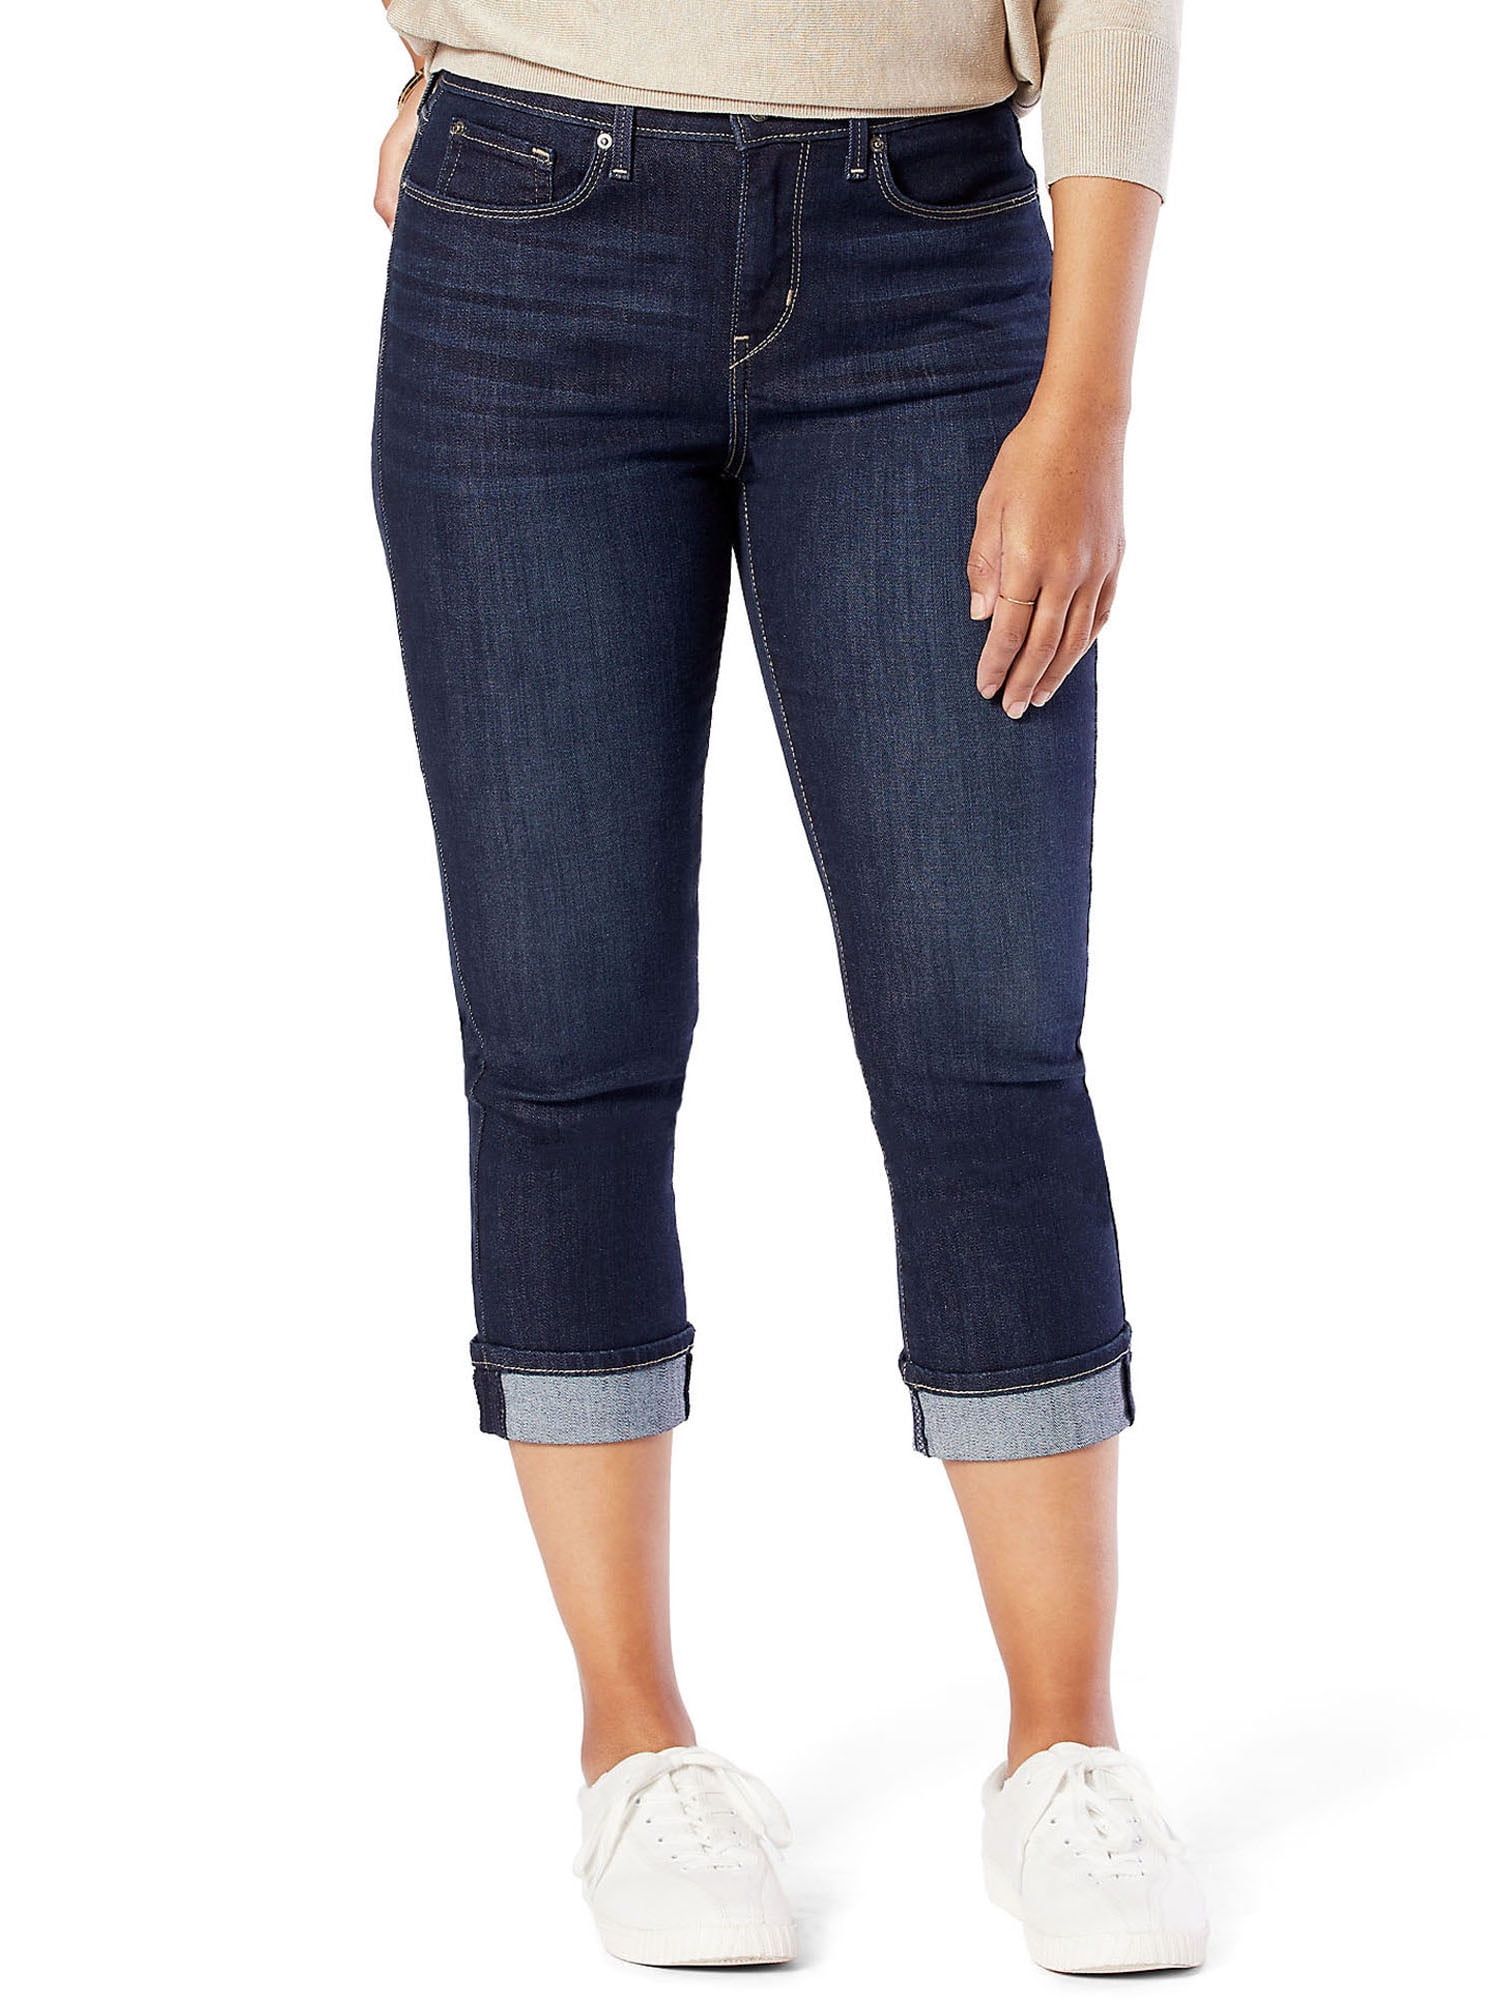 Mid & Rise by Levi Strauss Jeans Co. Capri Women\'s Signature